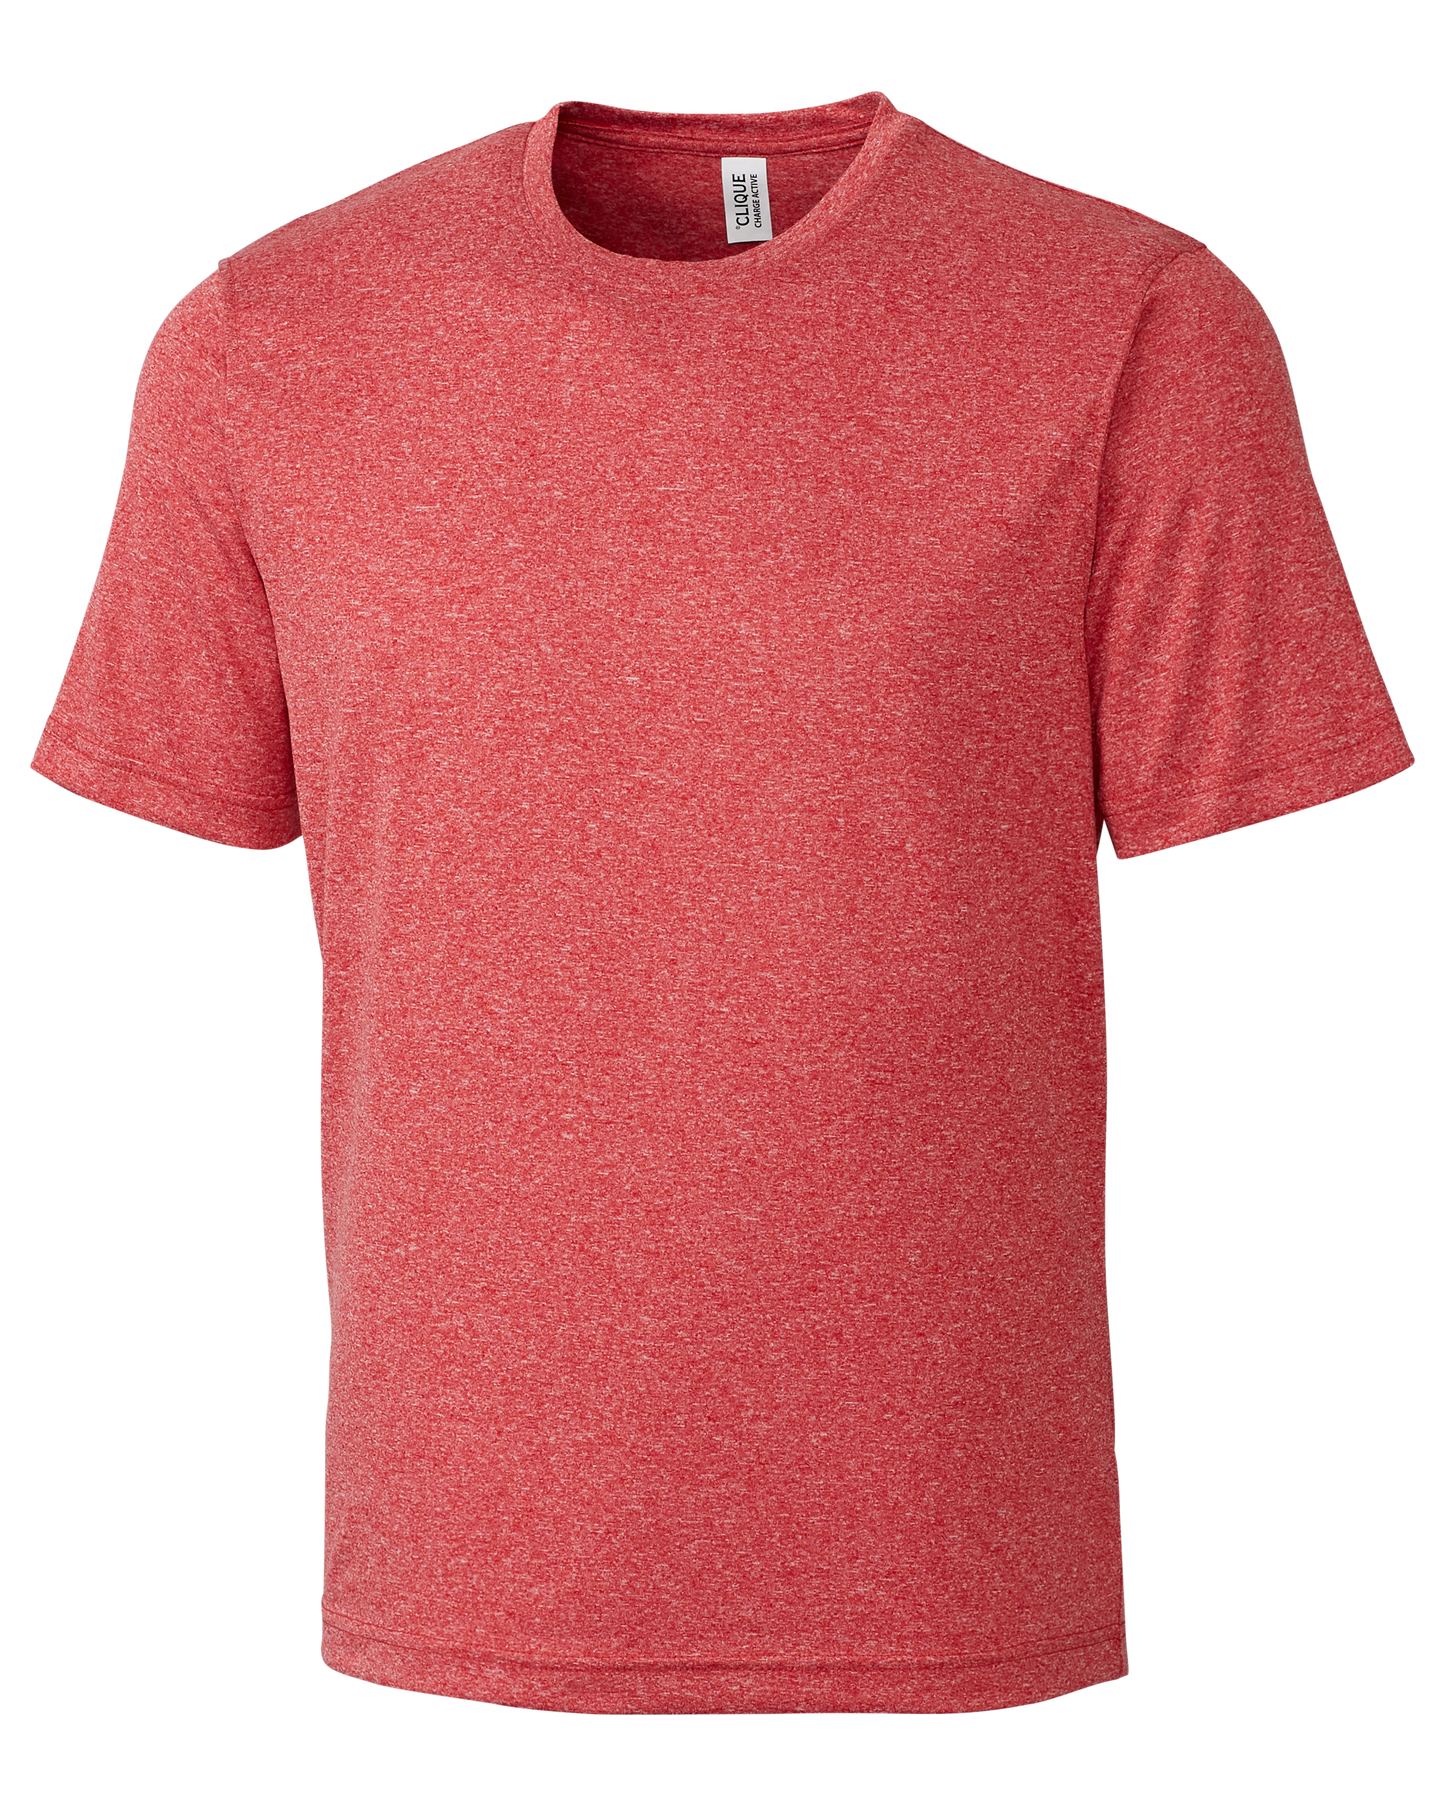 Active Mens Short Sleeve Tee - MQK00094